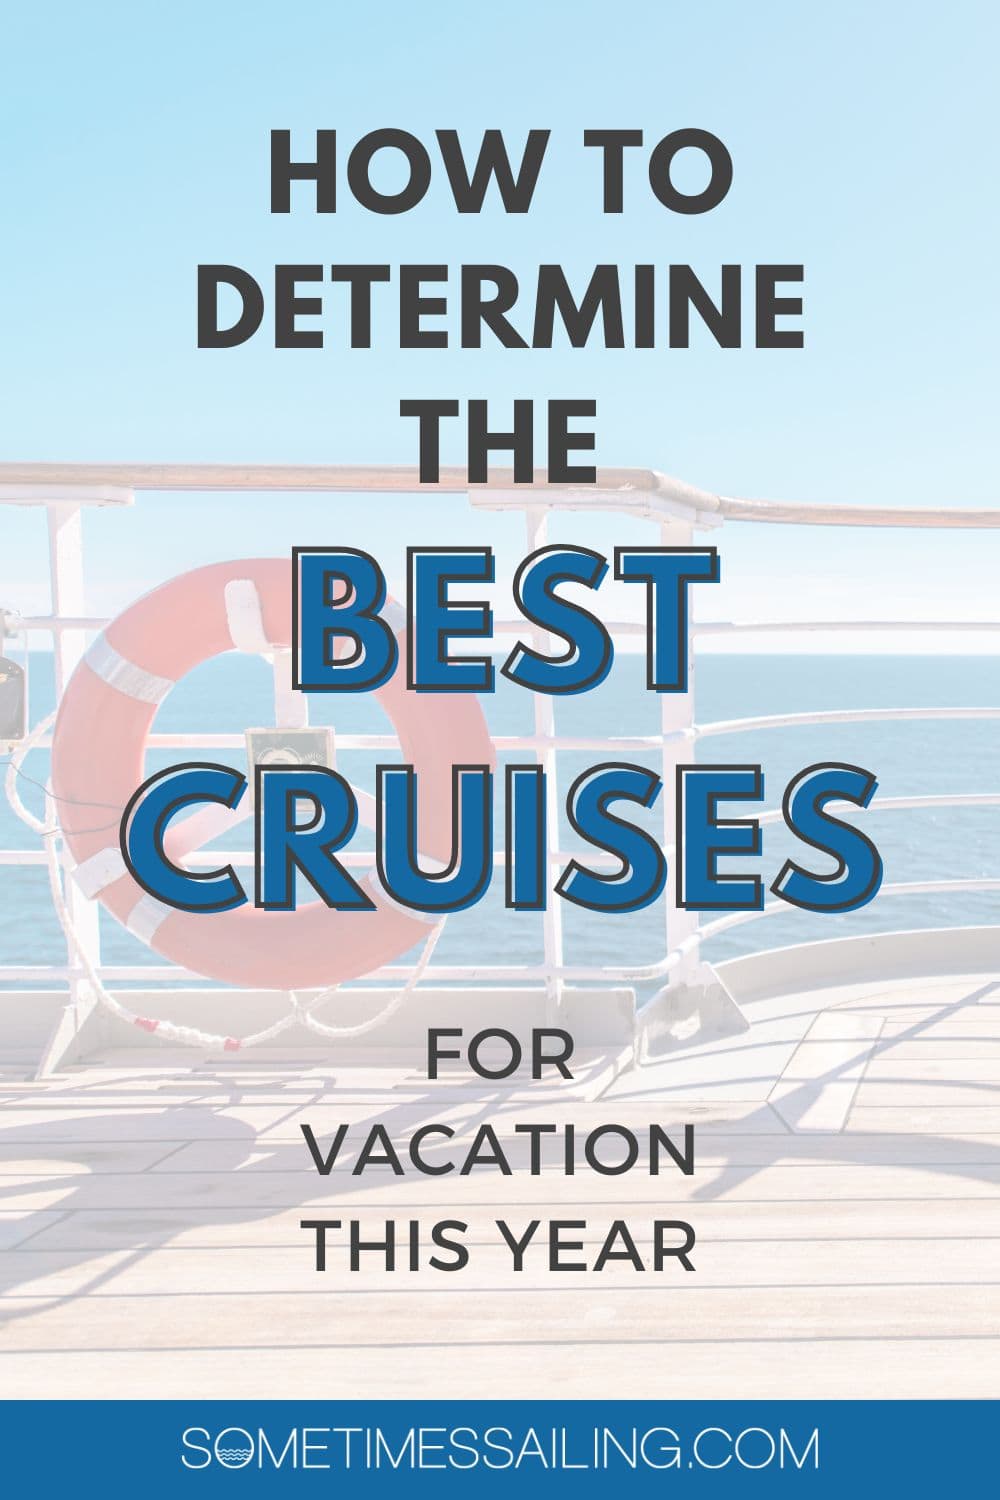 How to determine the Best Cruises for vacation this year.